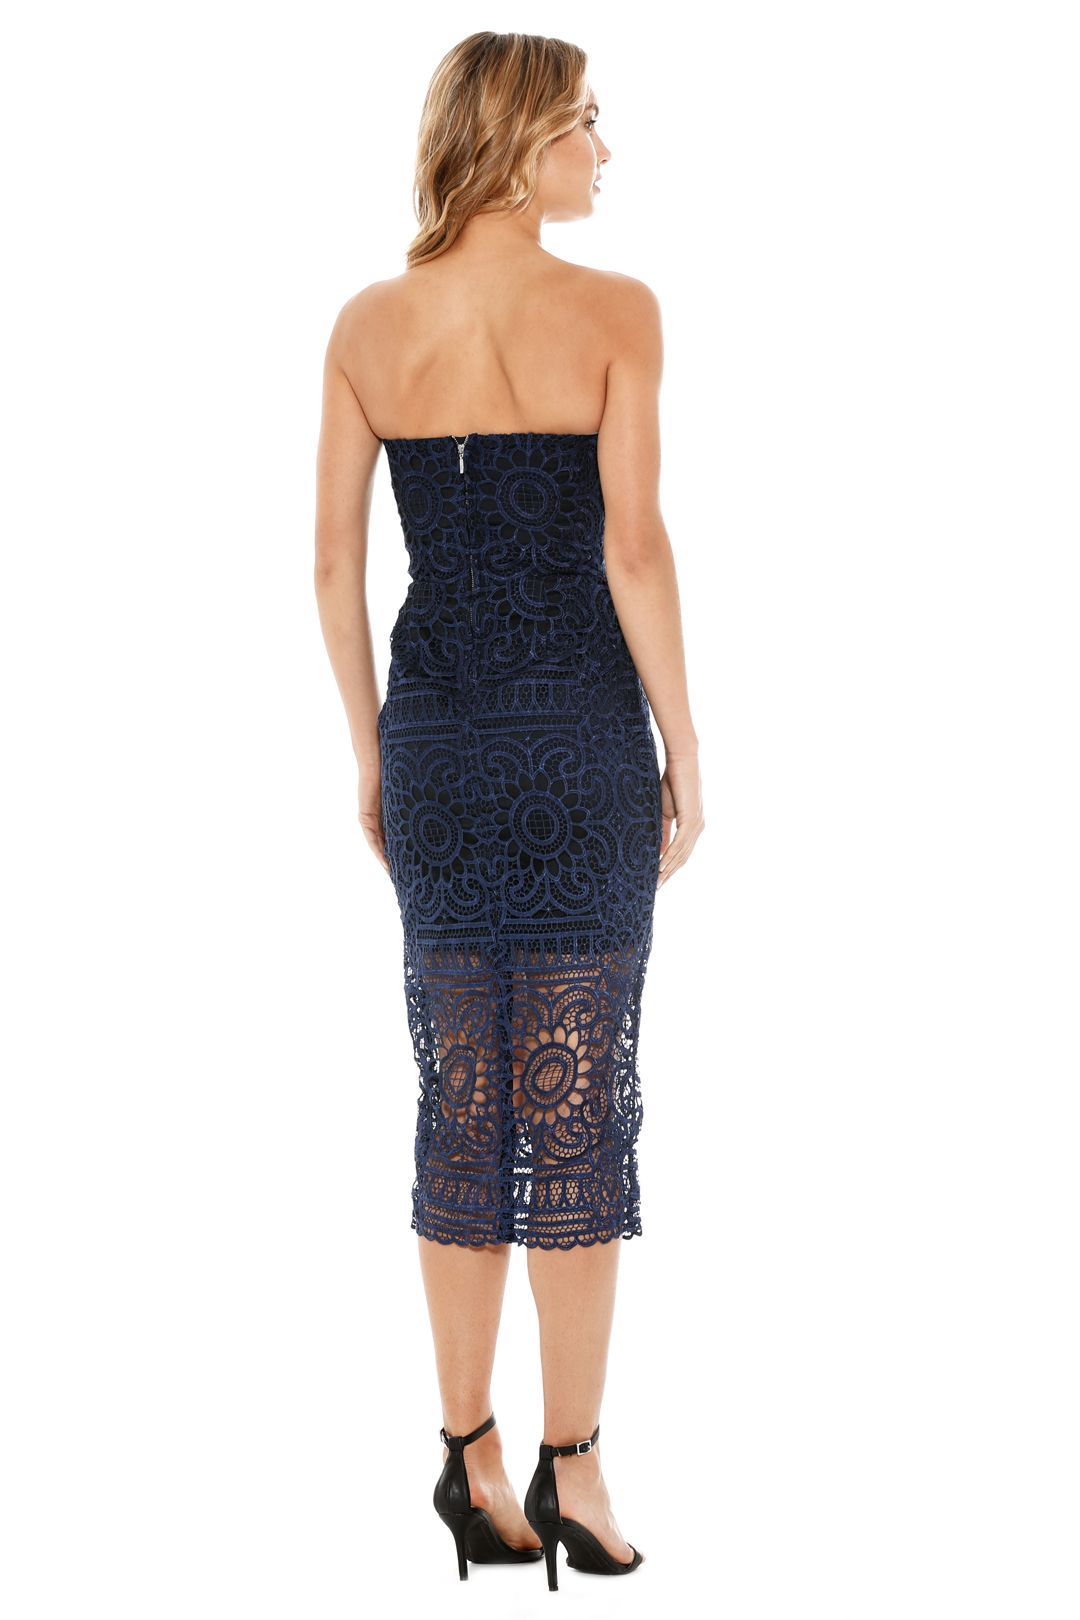 Nicholas the Label - Geo Floral Lace Strapless Dress - Navy - Back